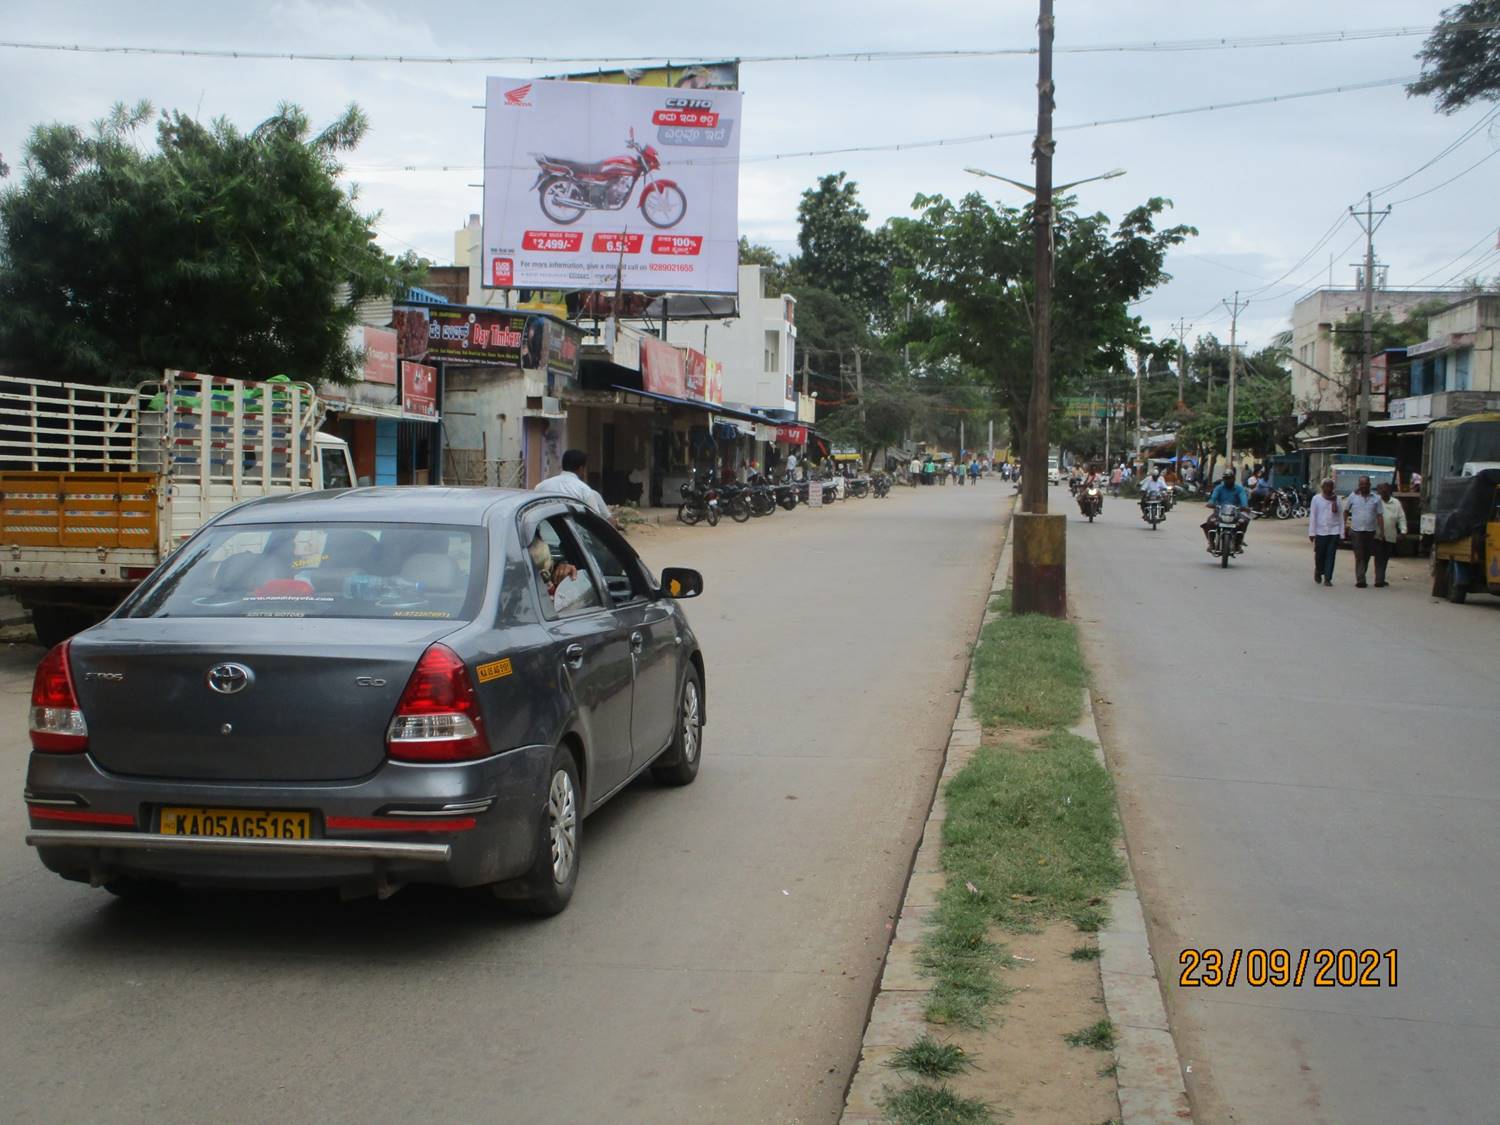 Outdoor Advertising image